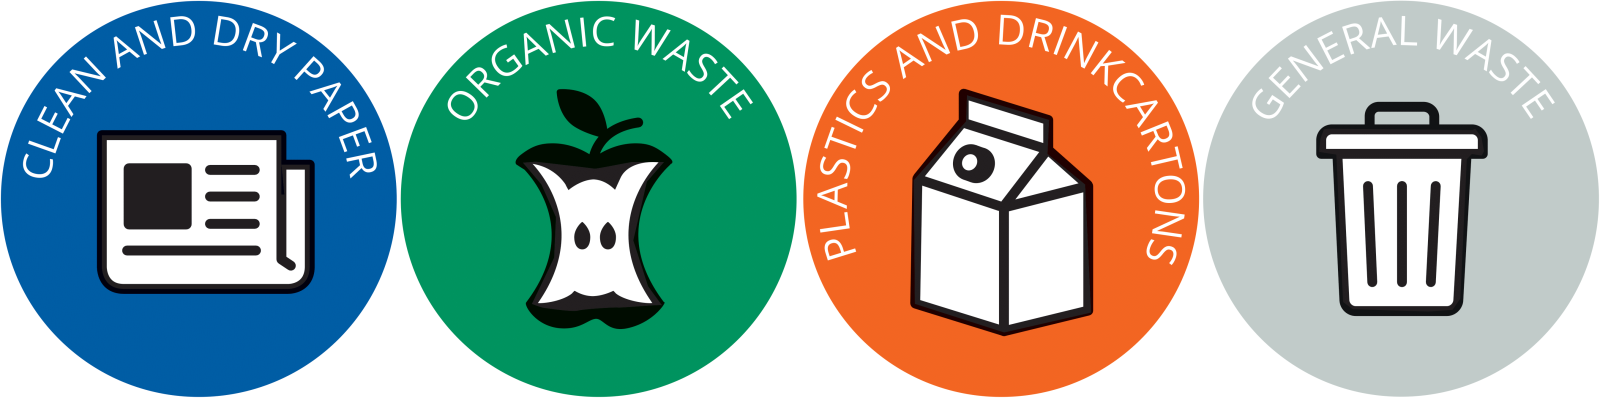 Four round stickers with pictograms for clean and dry paper, organic waste, plastic and drinking cartons, and general waste